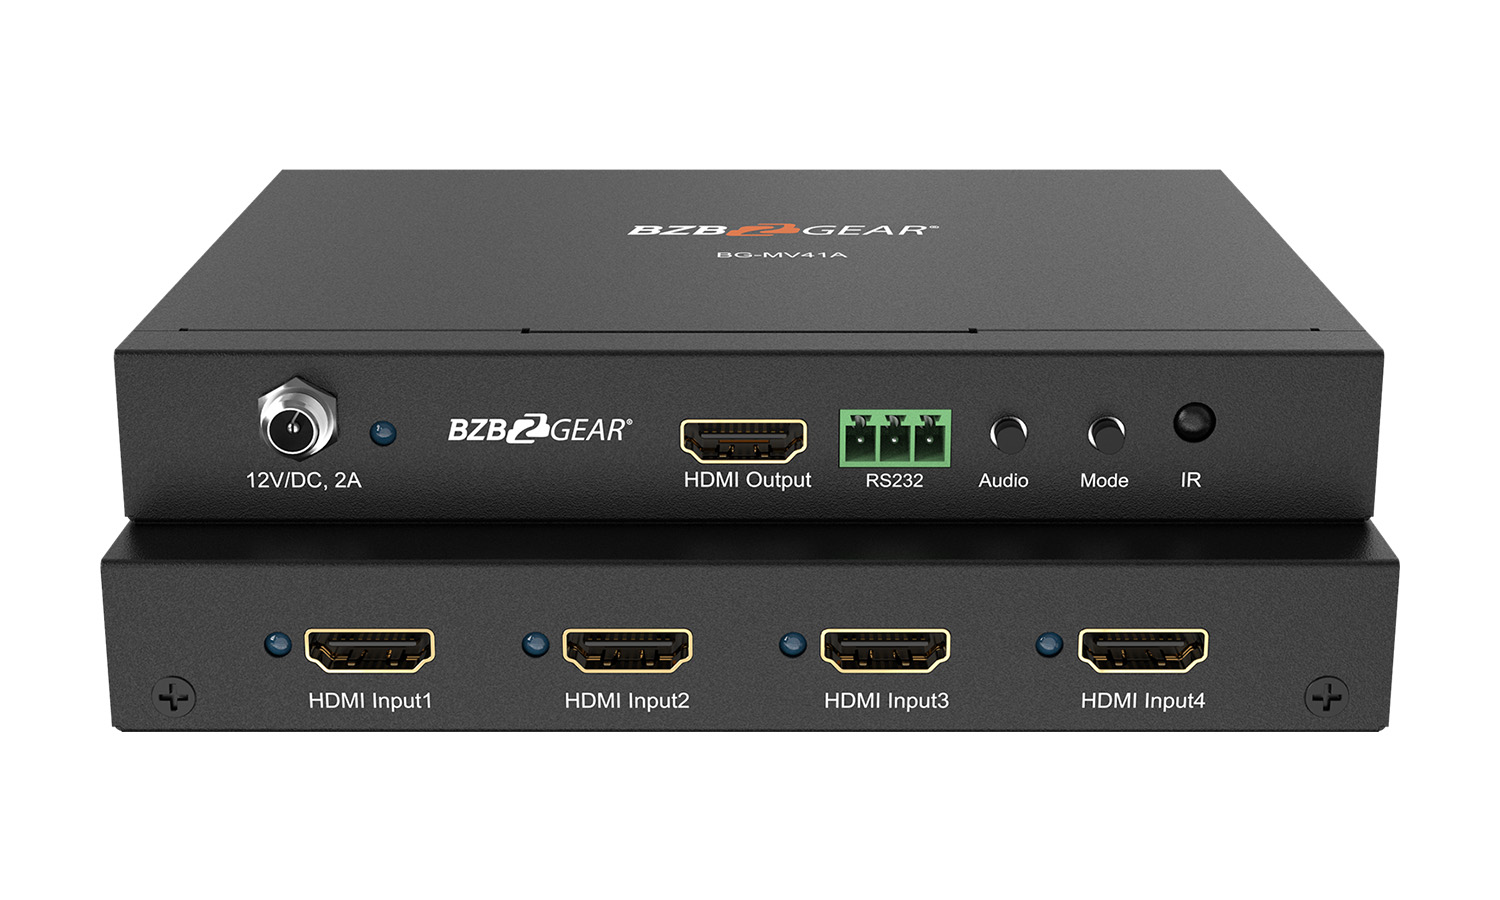 BZBGEAR BG-MV41A 4X1 Multiviewer with Scaler supporting multi output resolutions up to 1080P/60Hz